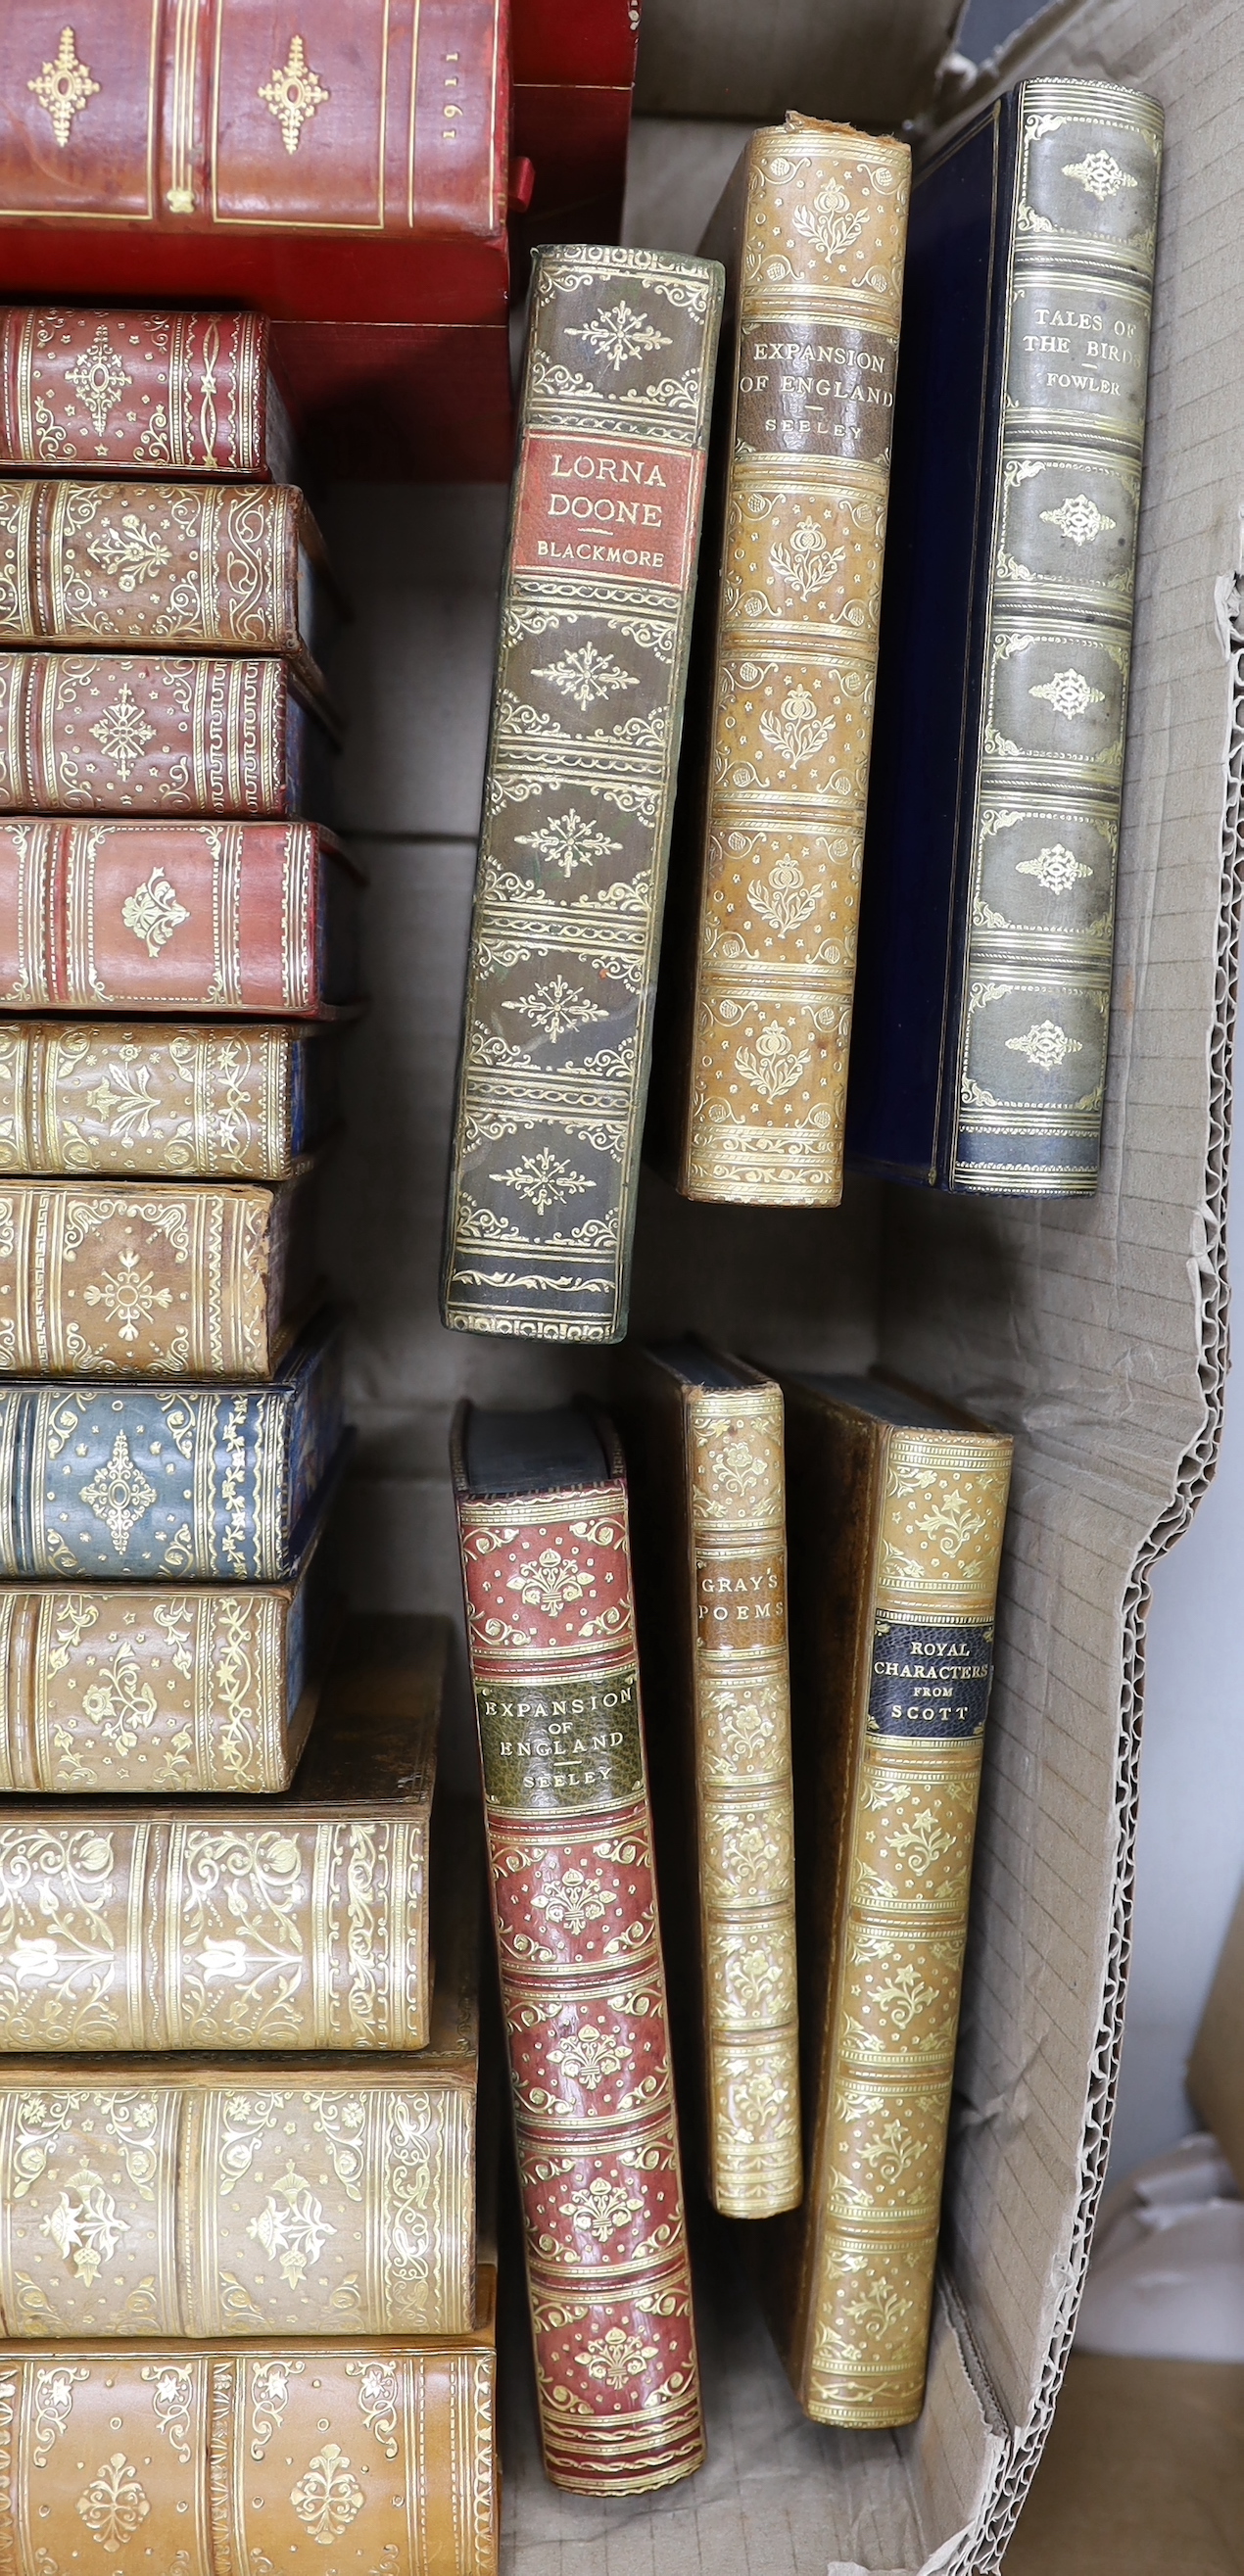 Calf bindings - 19 vols, some prize bindings with gilt armorials, mostly cr. 8vo. later 19th / earlier 20th century (19)